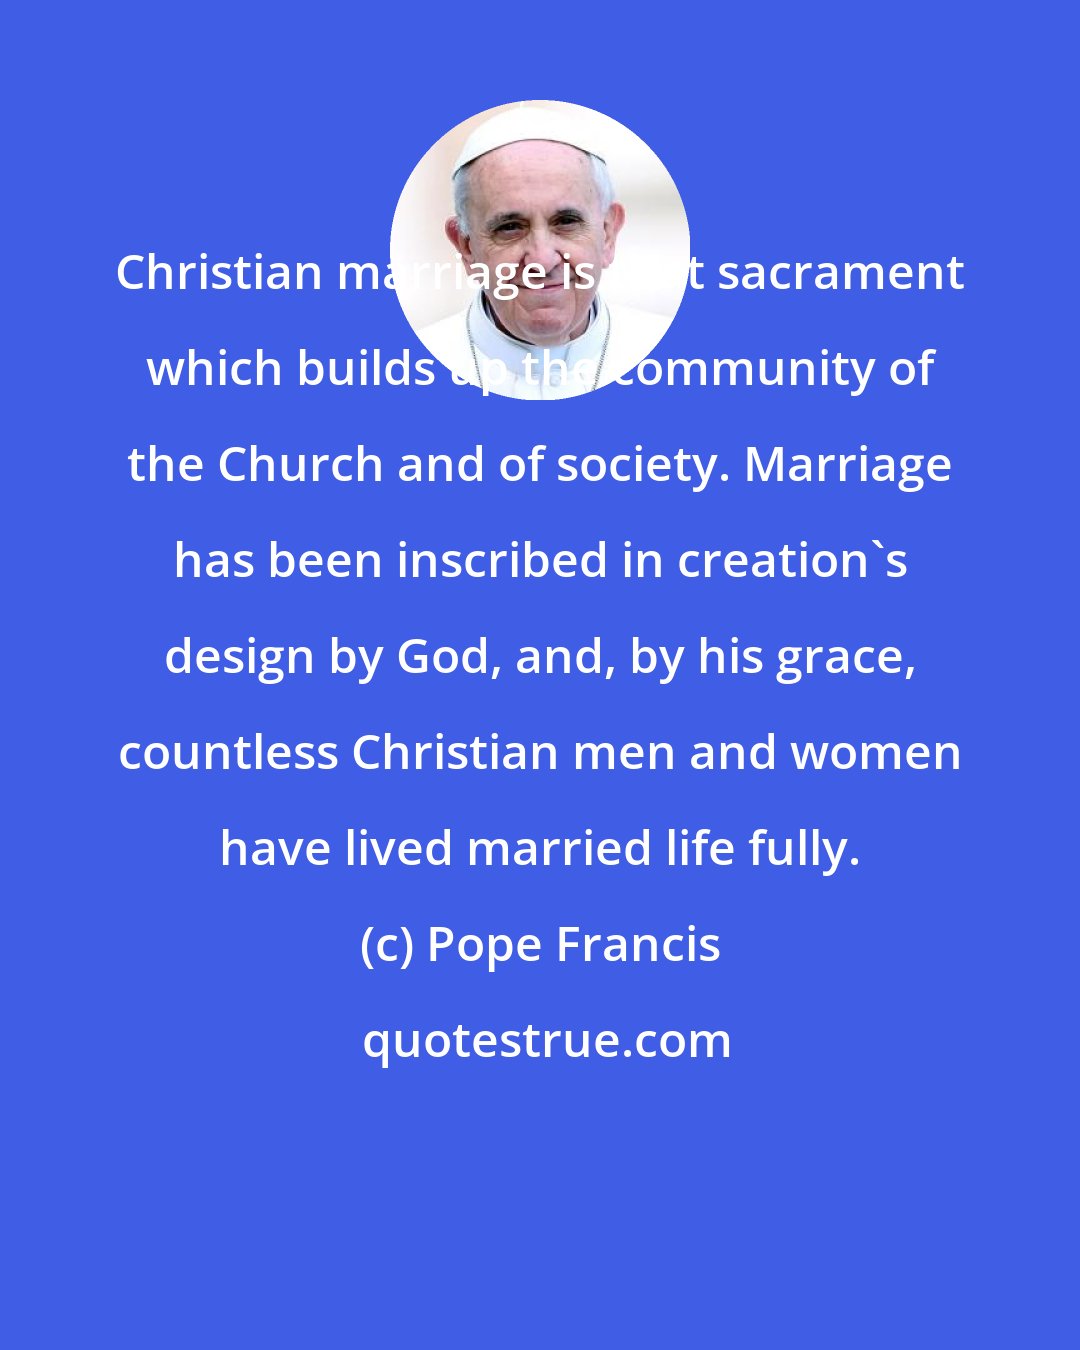 Pope Francis: Christian marriage is that sacrament which builds up the community of the Church and of society. Marriage has been inscribed in creation's design by God, and, by his grace, countless Christian men and women have lived married life fully.